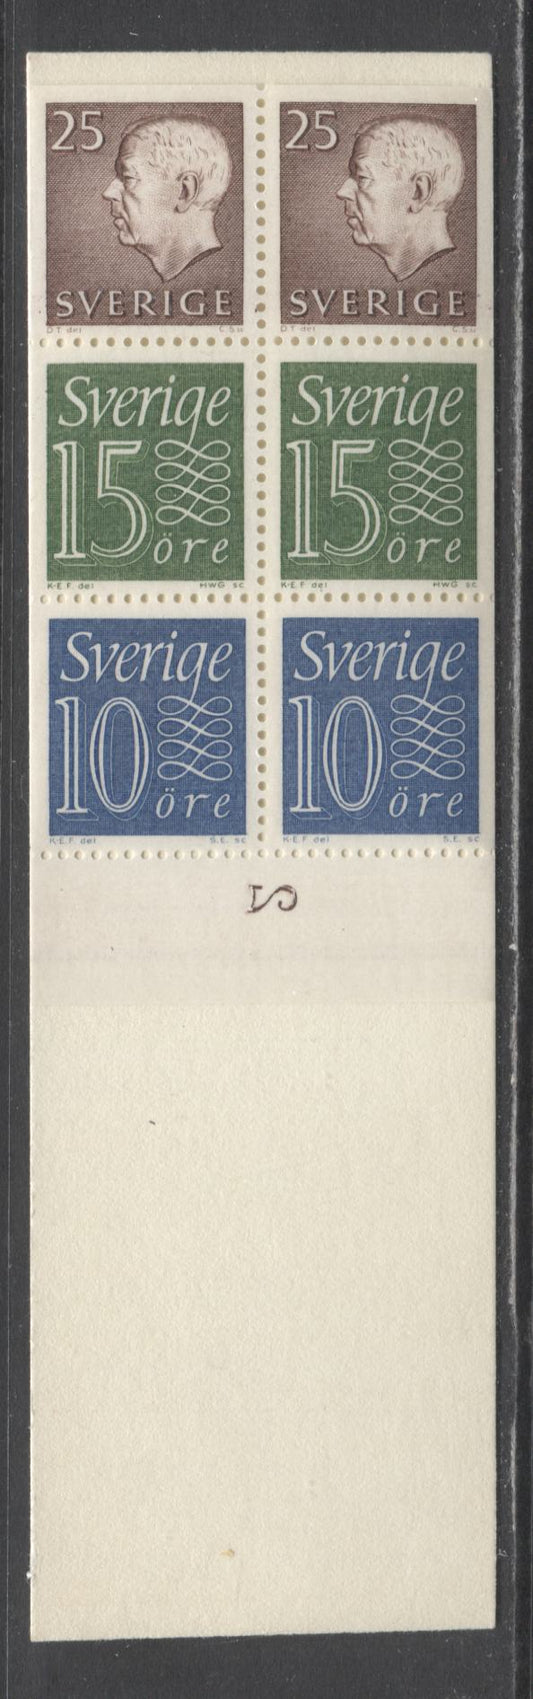 Lot 155 Sweden SC#580a (Facit #HA14A2O)  1965  King Gustav VI Adolf Definitive Issue, 3-Line Text and Doves Back Cover, Inverted Pane, Cylinder 2 Horizontal In Selvedge, A VFNH Booklet of 6 (2 +2+2), Estimated Value $17